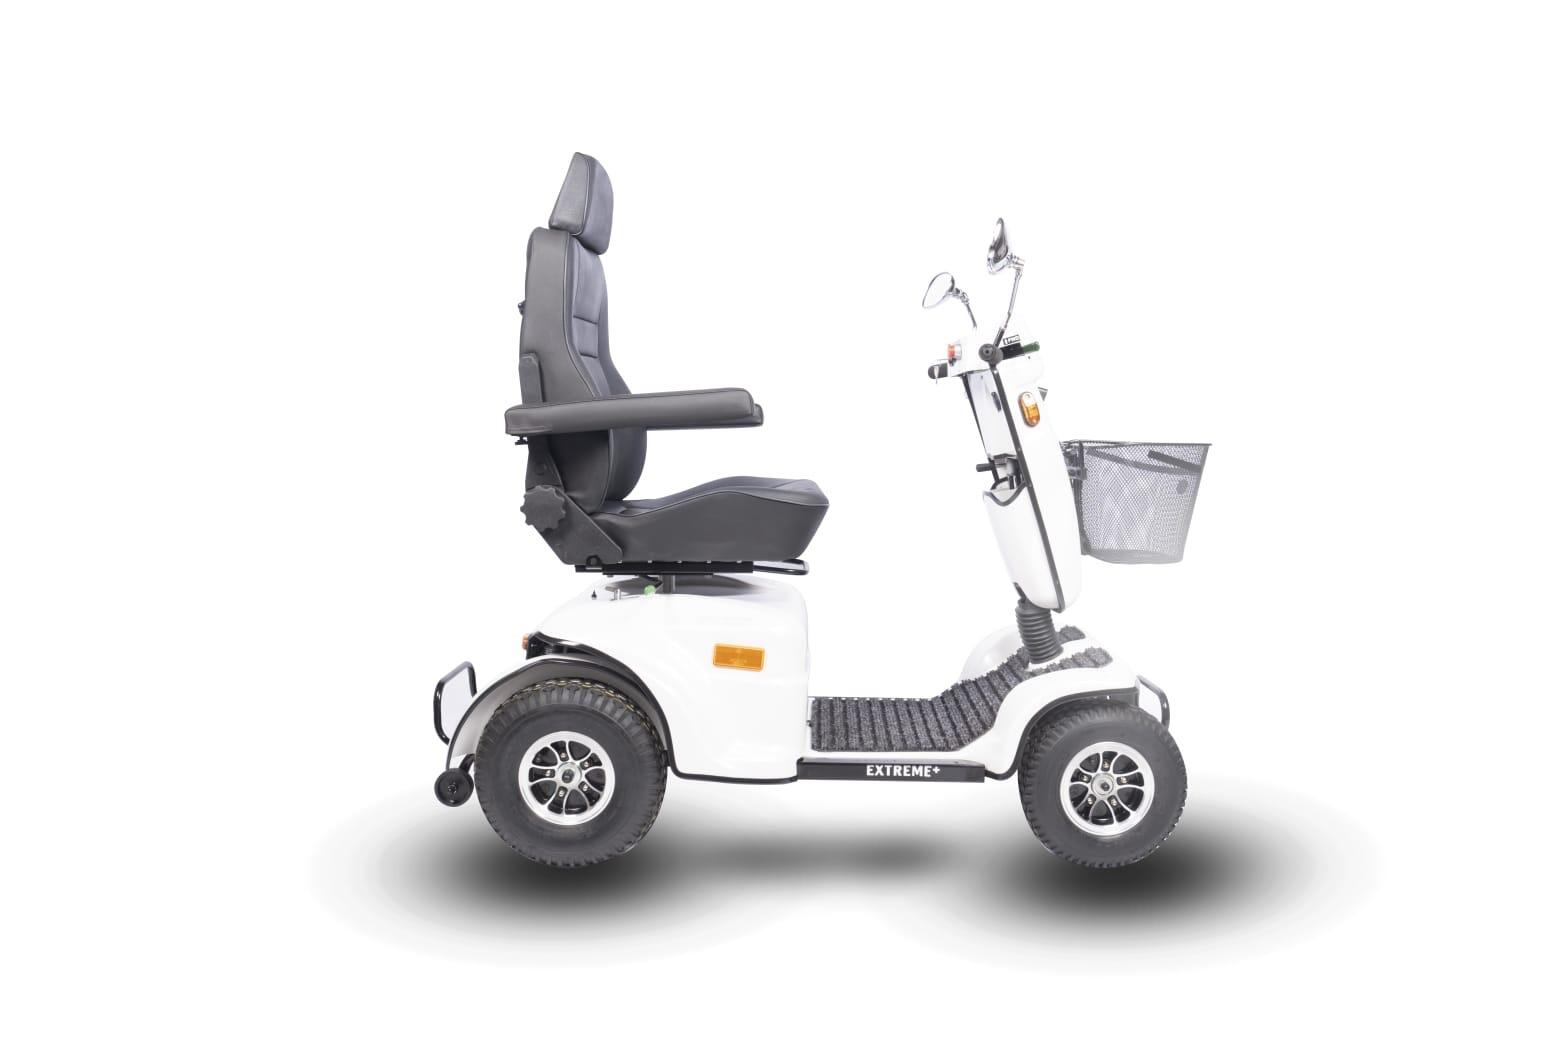 Extreme plus powerful mobility scooter near side view